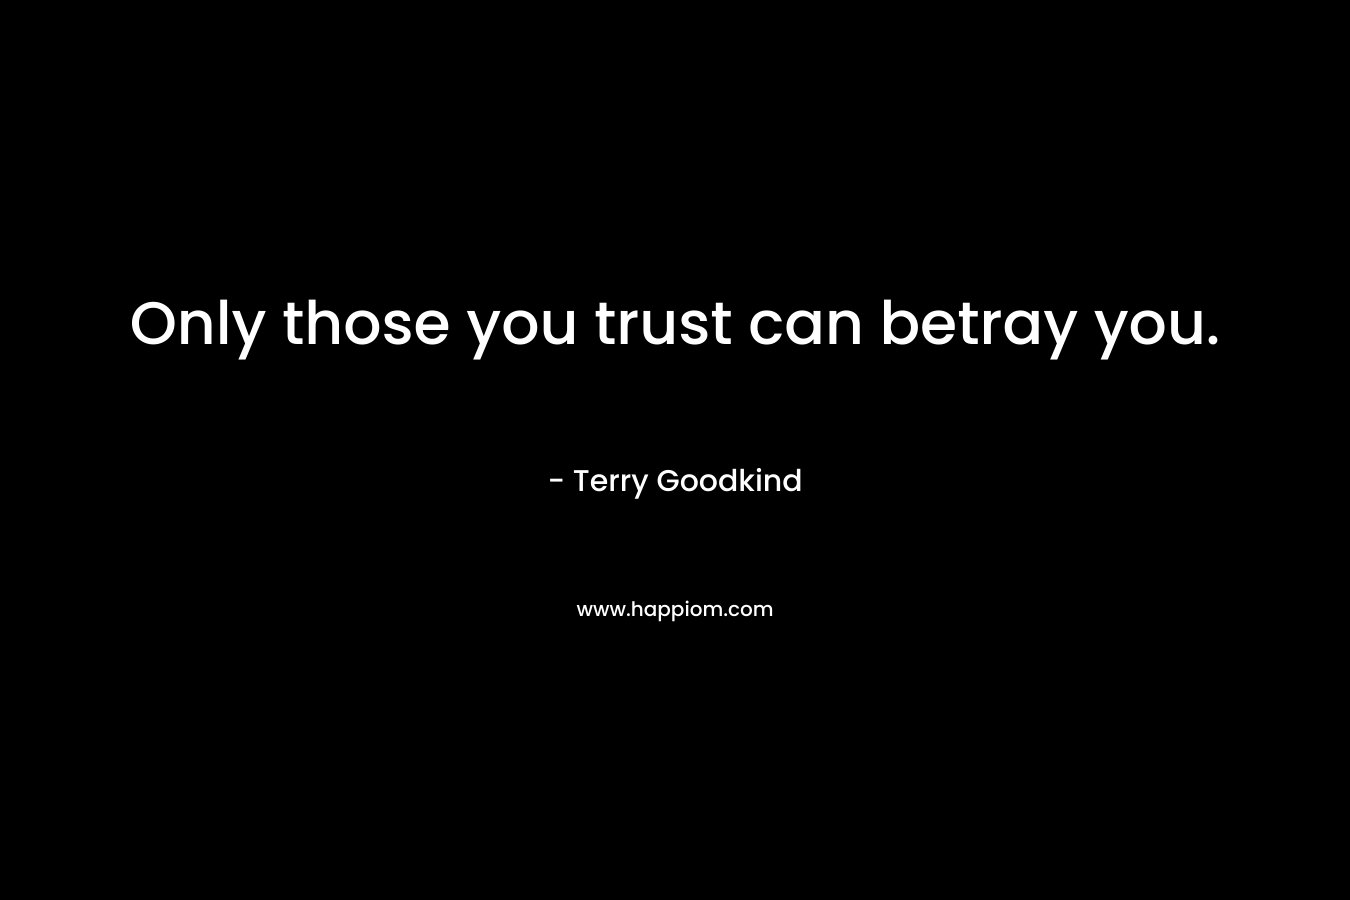 Only those you trust can betray you. – Terry Goodkind